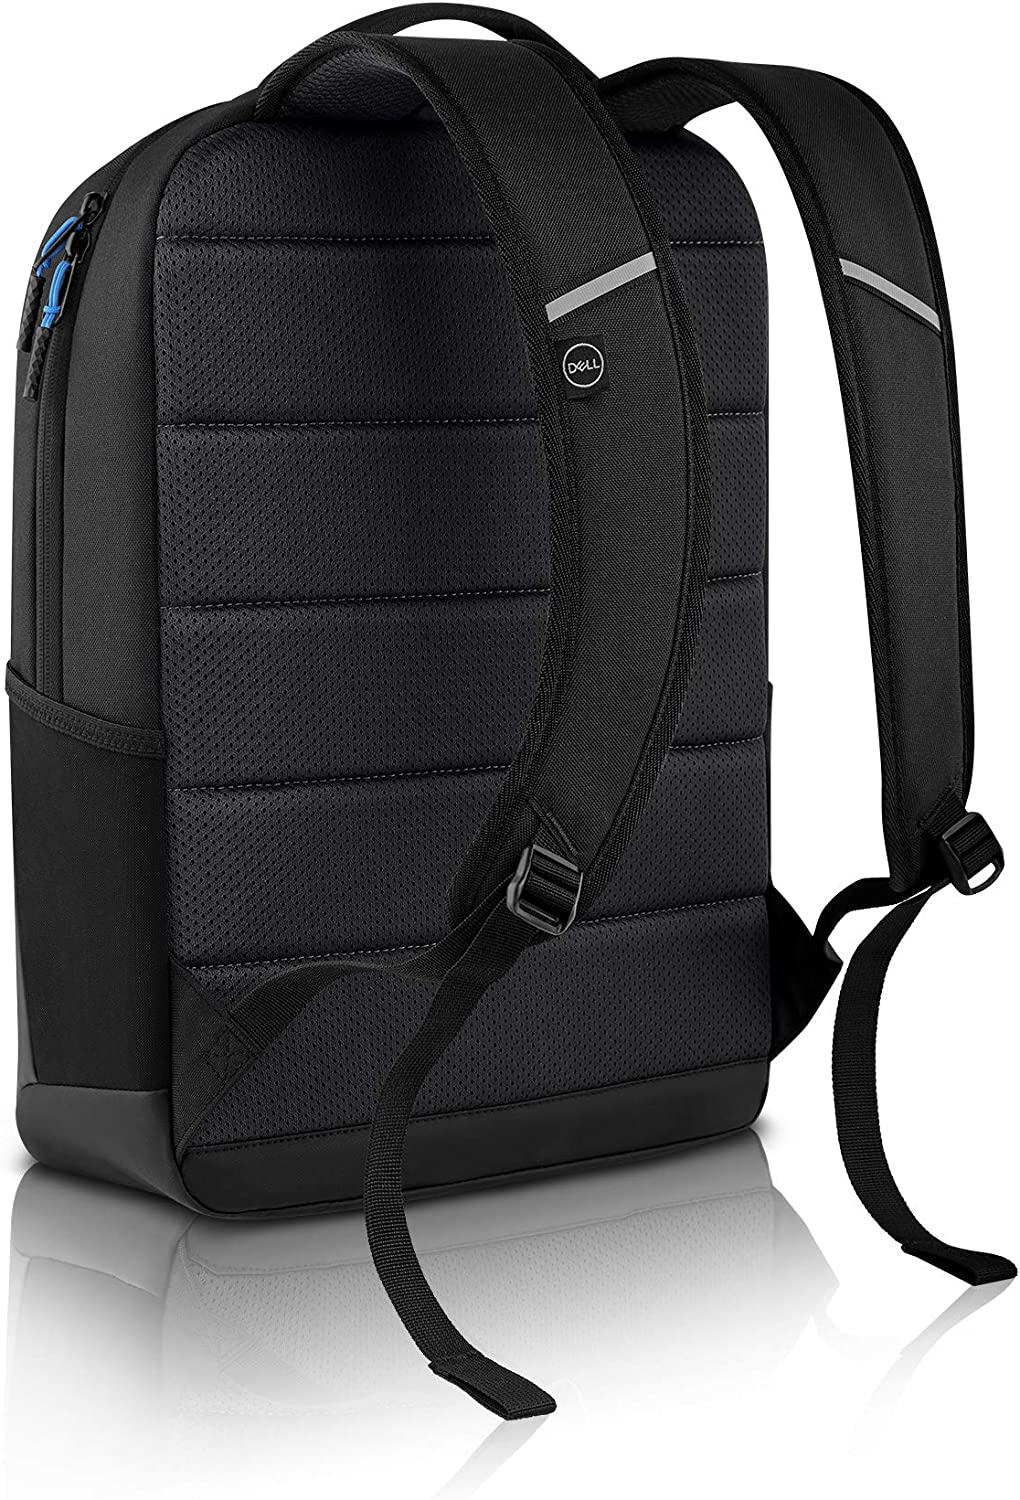 Laptop Backpack Bag for Dell Inspiron Latitude/Precision/Vostro/XPS 13 14  15.6 16 17 17.3 Inch Notebook Backpack Rucksack Case